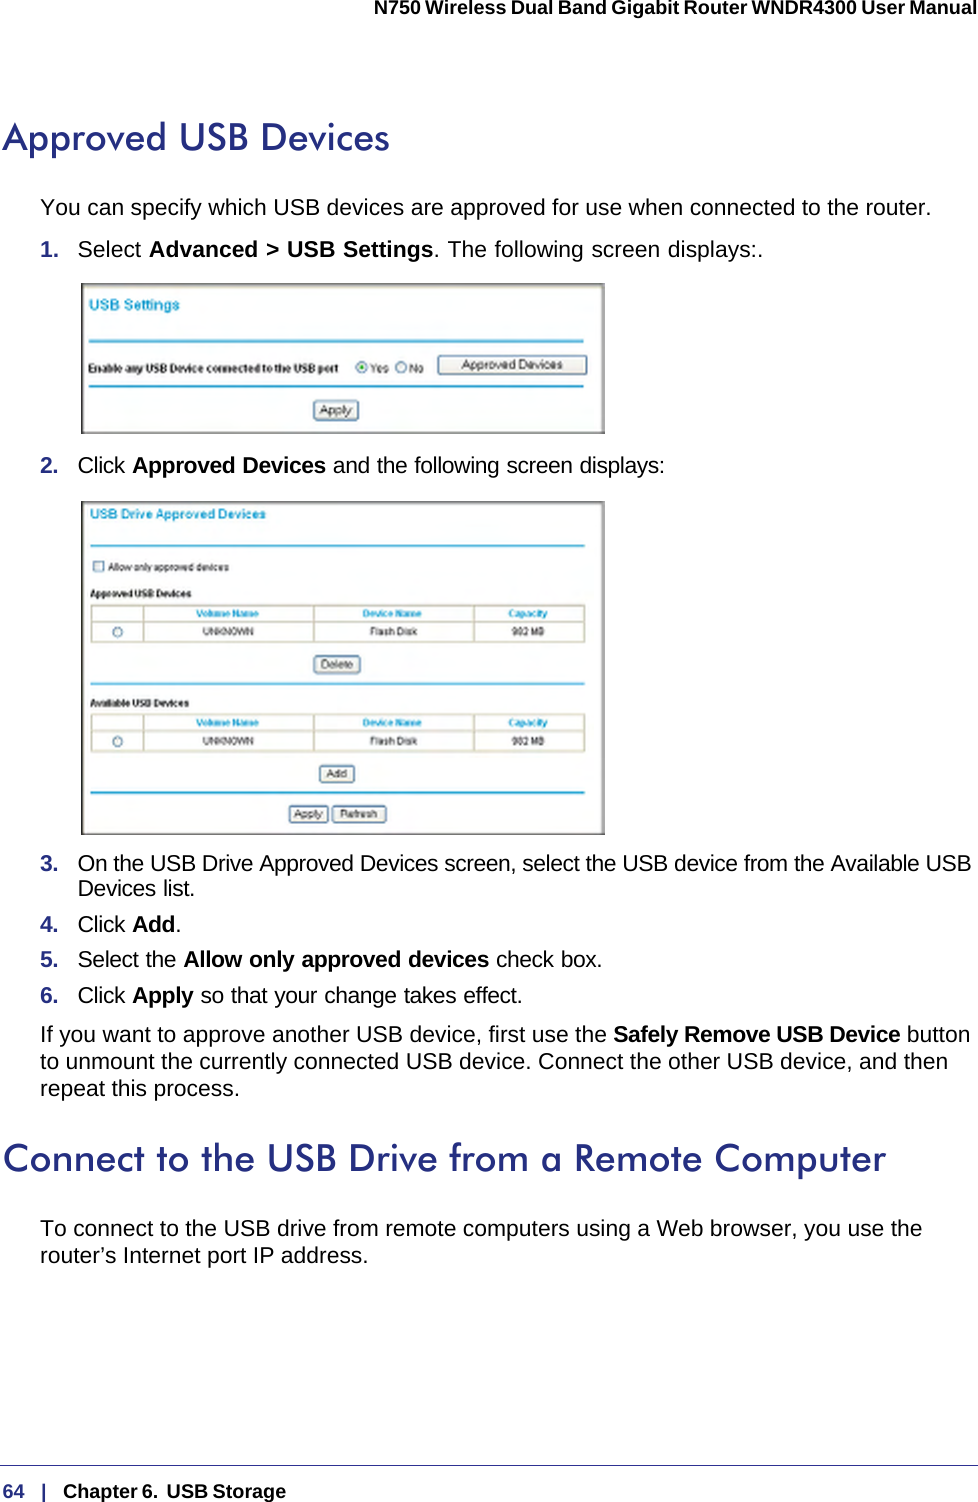 64   |   Chapter 6.  USB Storage  N750 Wireless Dual Band Gigabit Router WNDR4300 User Manual Approved USB DevicesYou can specify which USB devices are approved for use when connected to the router.1.  Select Advanced &gt; USB Settings. The following screen displays:. 2.  Click Approved Devices and the following screen displays: 3.  On the USB Drive Approved Devices screen, select the USB device from the Available USB Devices list.4.  Click Add.5.  Select the Allow only approved devices check box.6.  Click Apply so that your change takes effect.If you want to approve another USB device, first use the Safely Remove USB Device button to unmount the currently connected USB device. Connect the other USB device, and then repeat this process.Connect to the USB Drive from a Remote ComputerTo connect to the USB drive from remote computers using a Web browser, you use the router’s Internet port IP address.